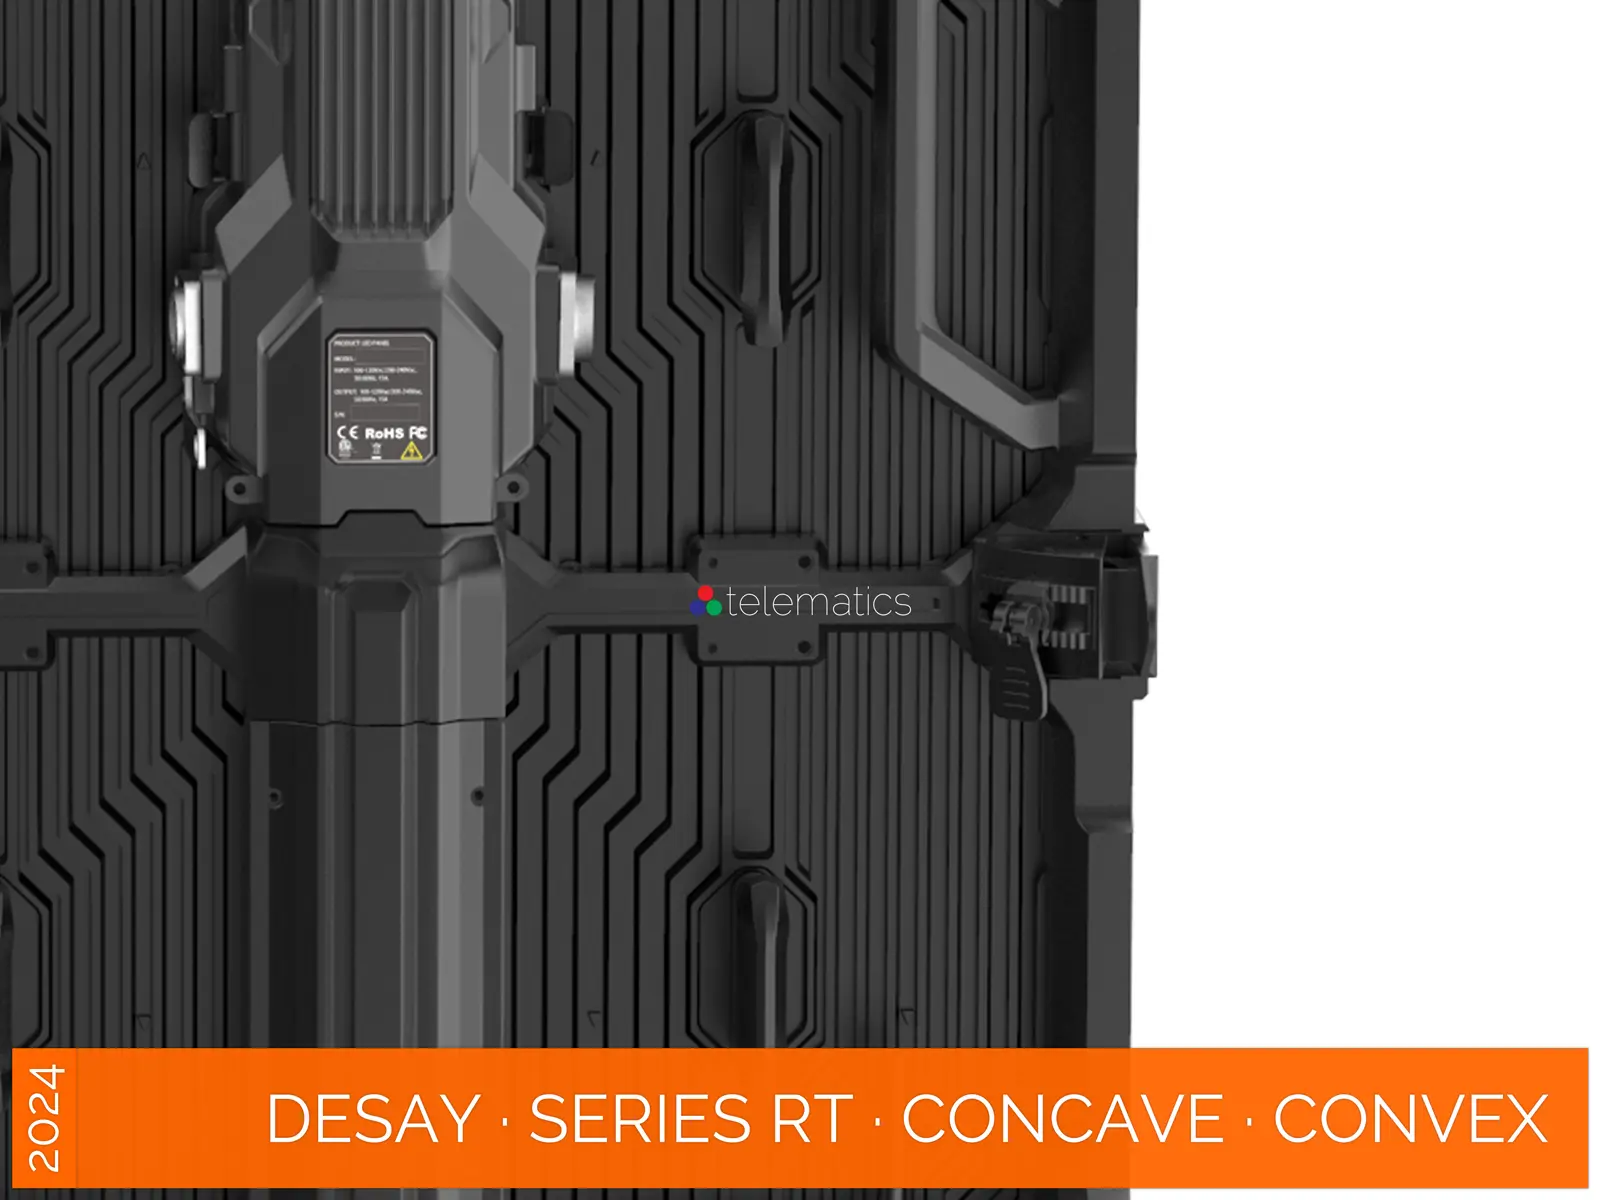 Desay · Series RT · Direct View LED Display Panel · Full Pixel Range · Rental Or Touring · Outdoor Rated · Rapid Service And Setup · Concave And Convex On Demand · NovaStar COEX MX CX · Vision Management Platform · Viplex · review · price · cost · priced from $1,790 per square meter